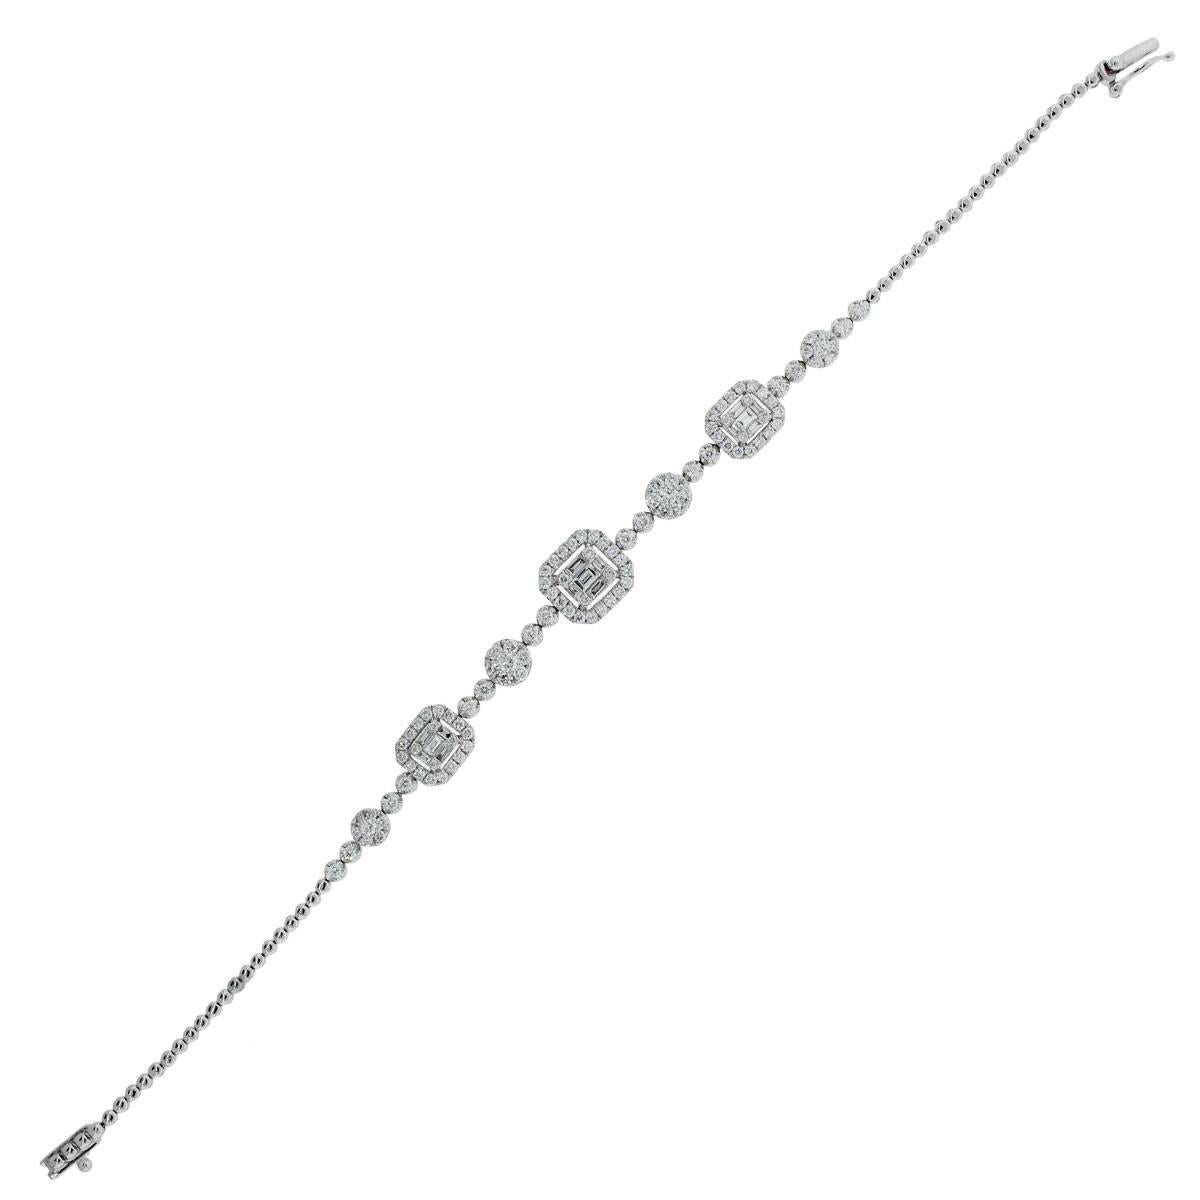 Material: 18k white gold
Diamond Details: Approximately 1.80ctw of round brilliant and baguette shape diamonds. Diamonds are G in color and SI in clarity
Fastening: Tongue in box clasp with safety latch
Length: Will fit a 7″ wrist
Item Weight: 8.6g